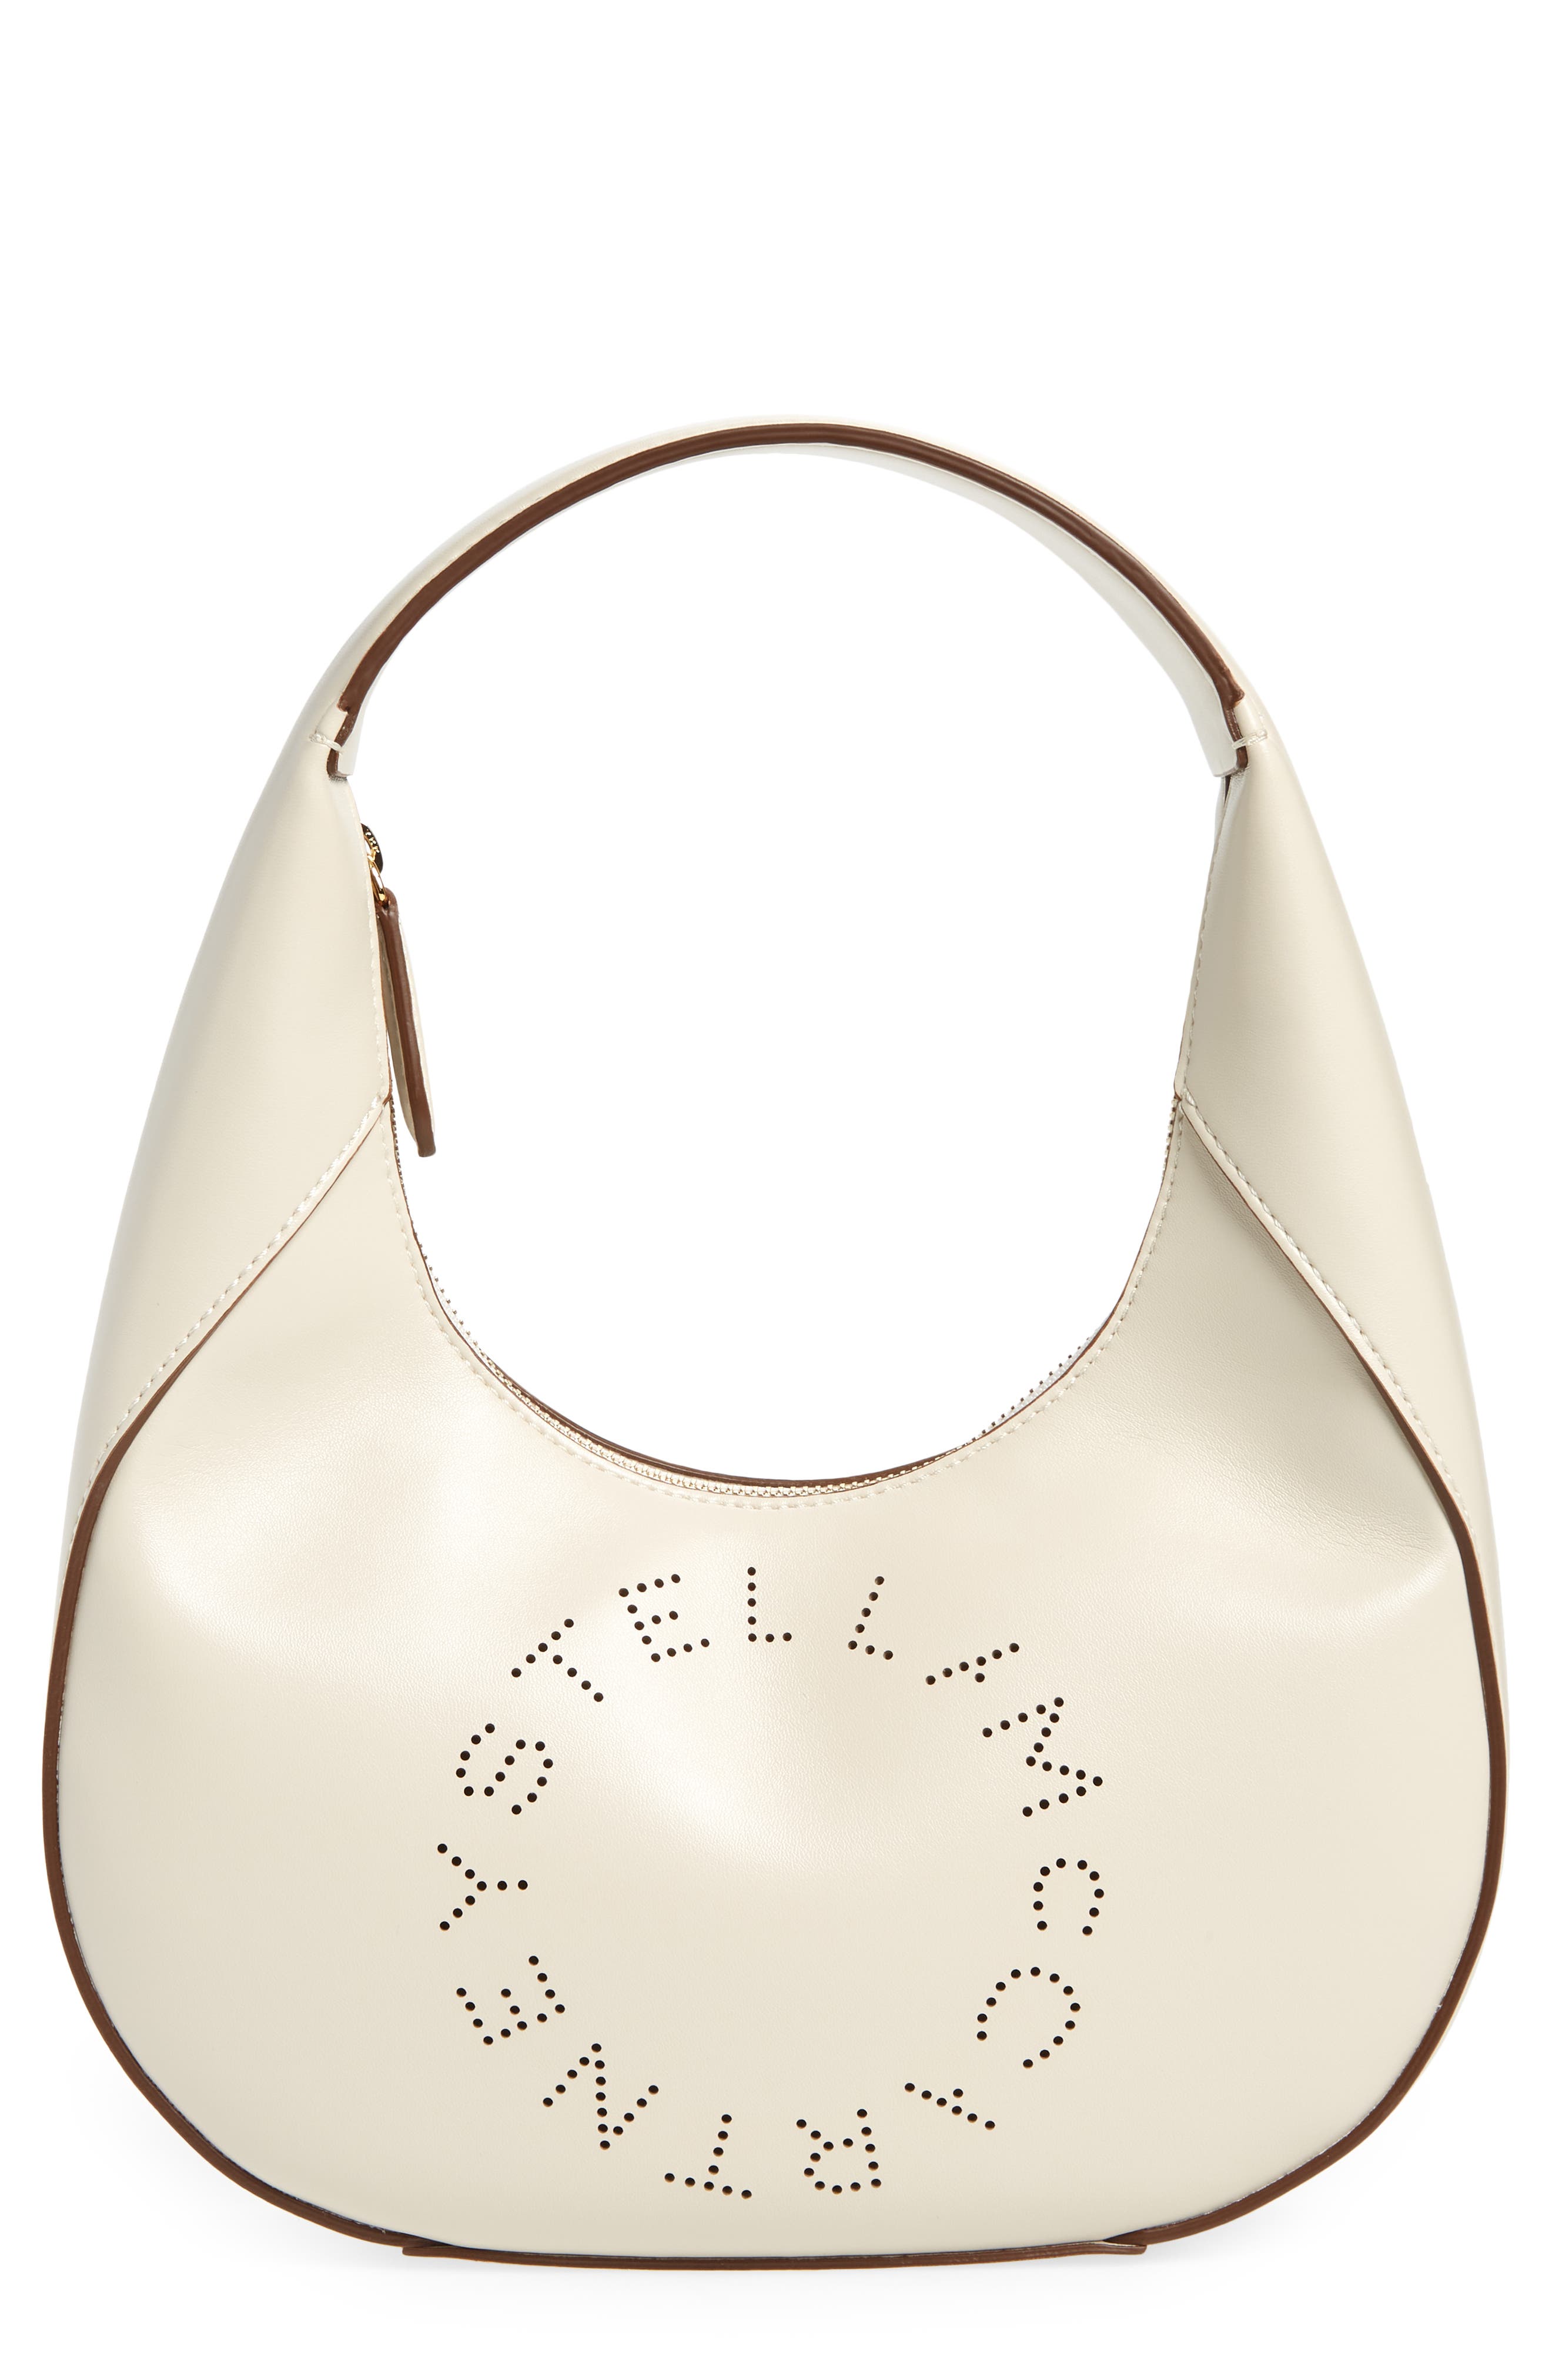 Stella McCartney Small Logo Alter Faux Leather Hobo Bag in Pure White at Nordstrom